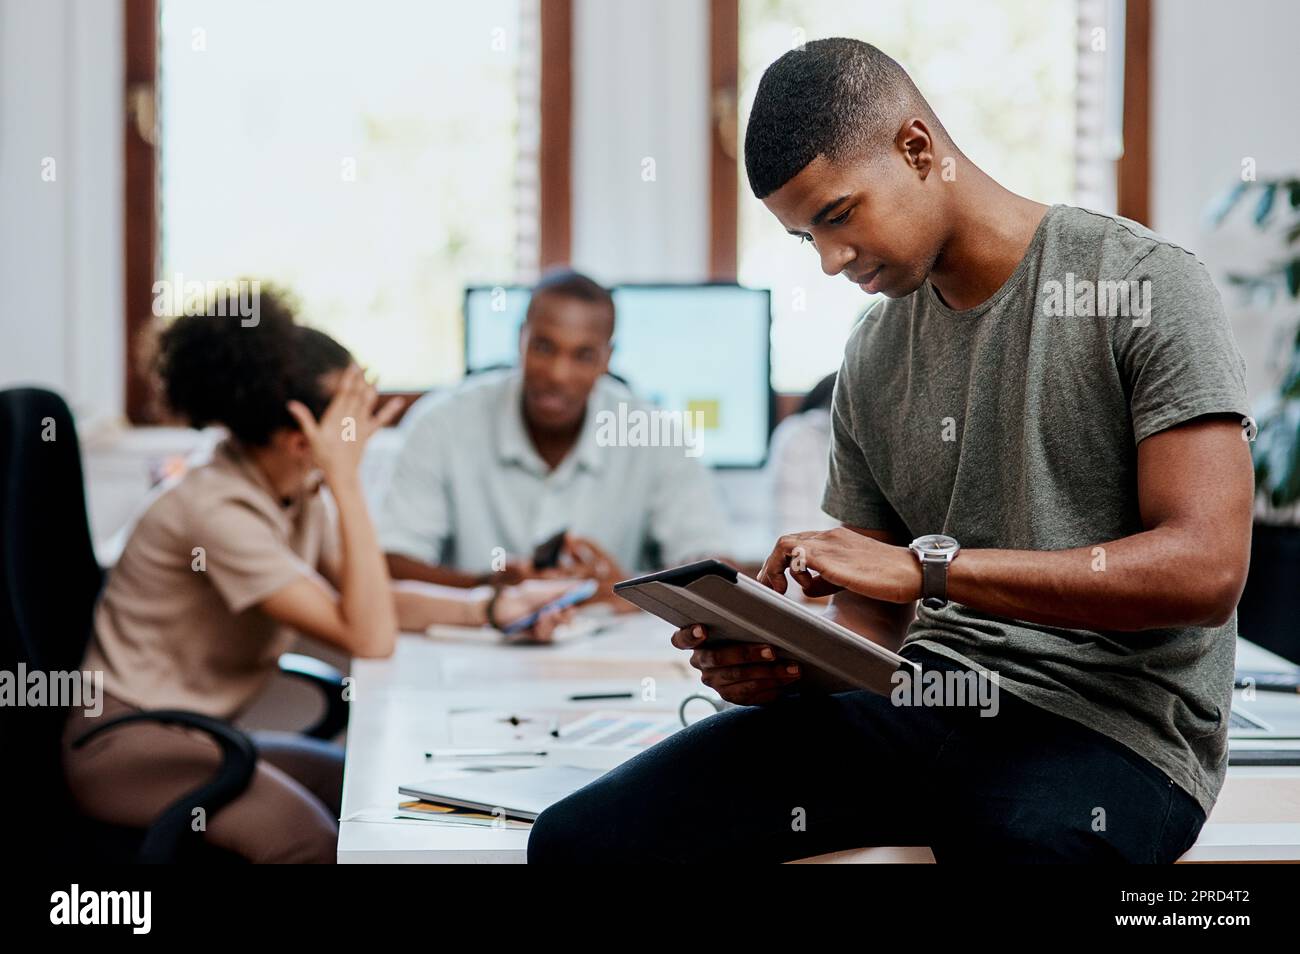 The perfect tool for a modern manager. a young businessman using a digital tablet during a meeting in a modern office. Stock Photo